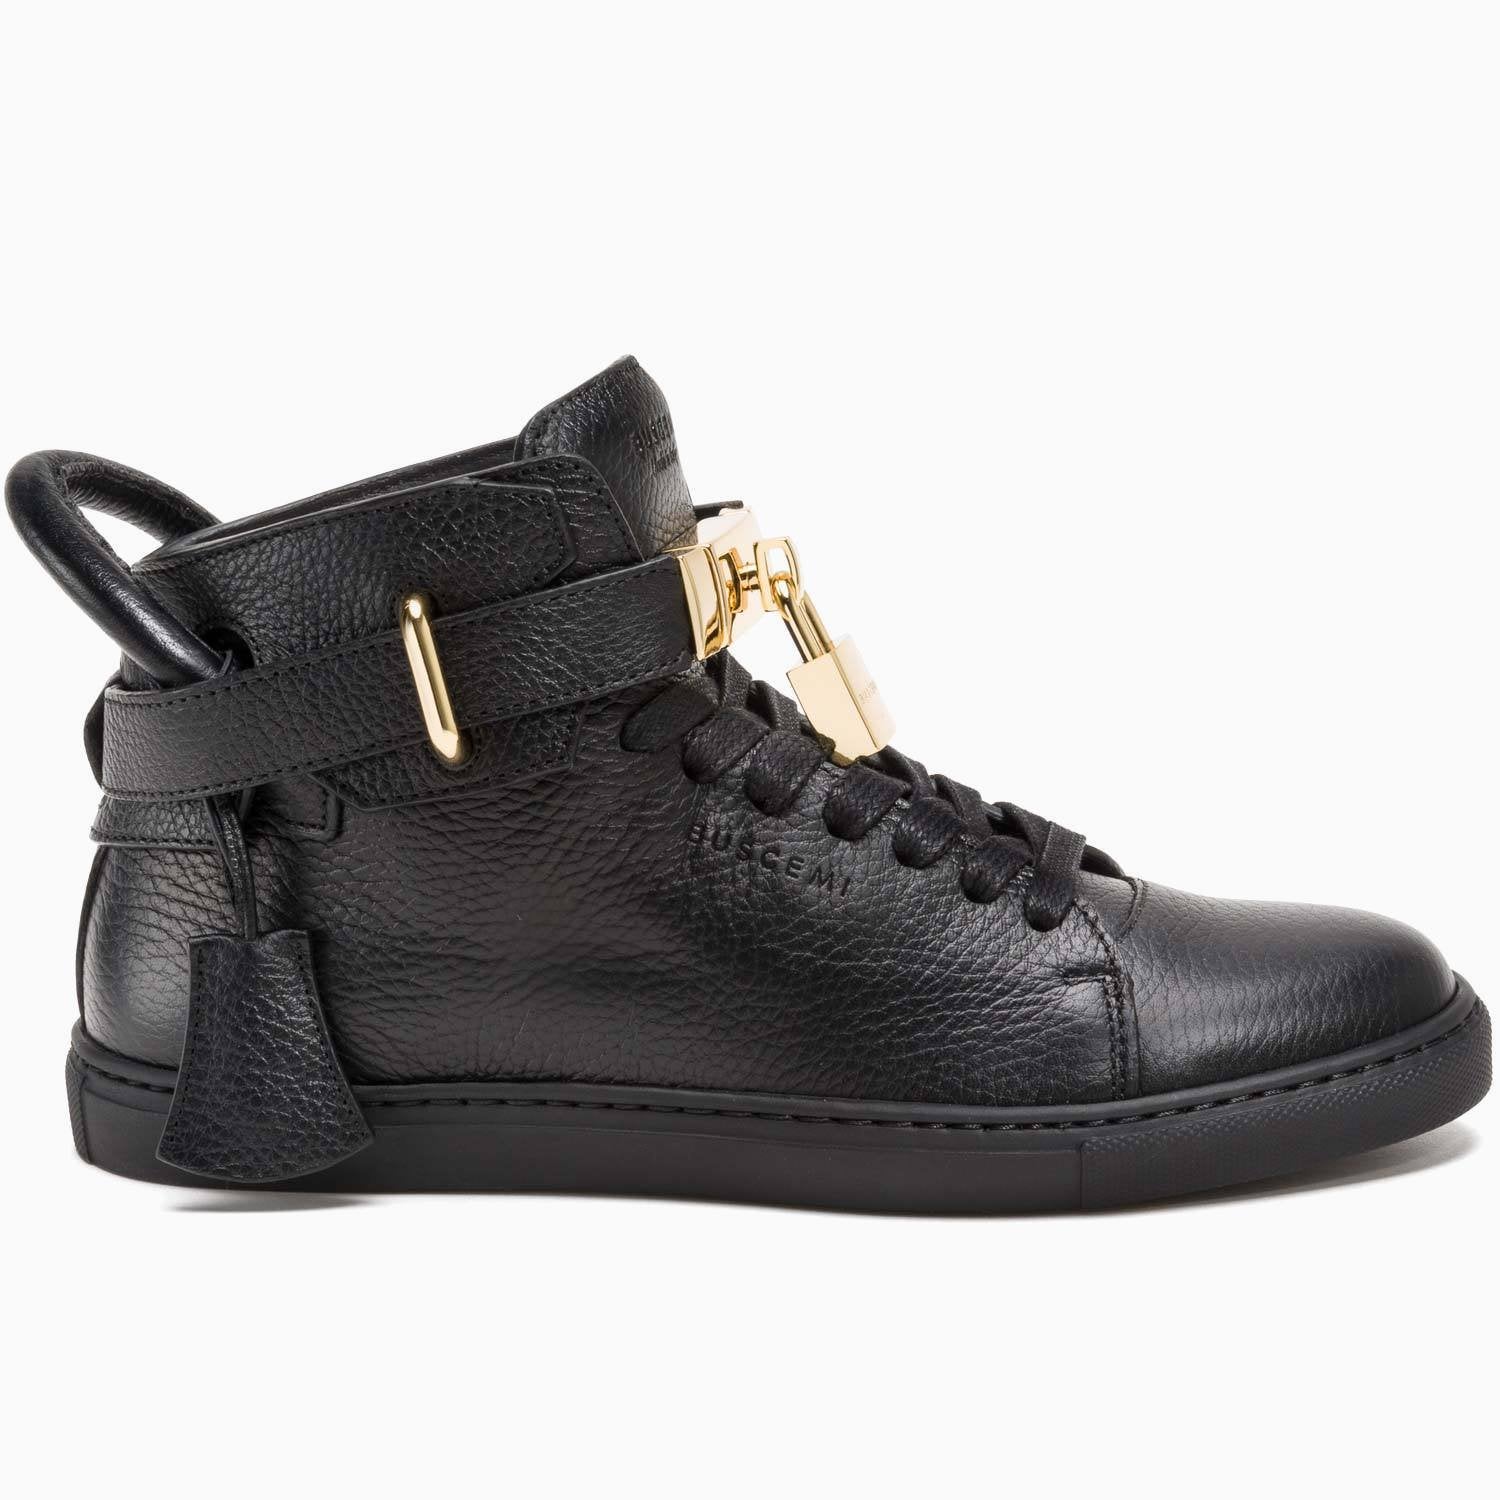 buscemi gold sneakers